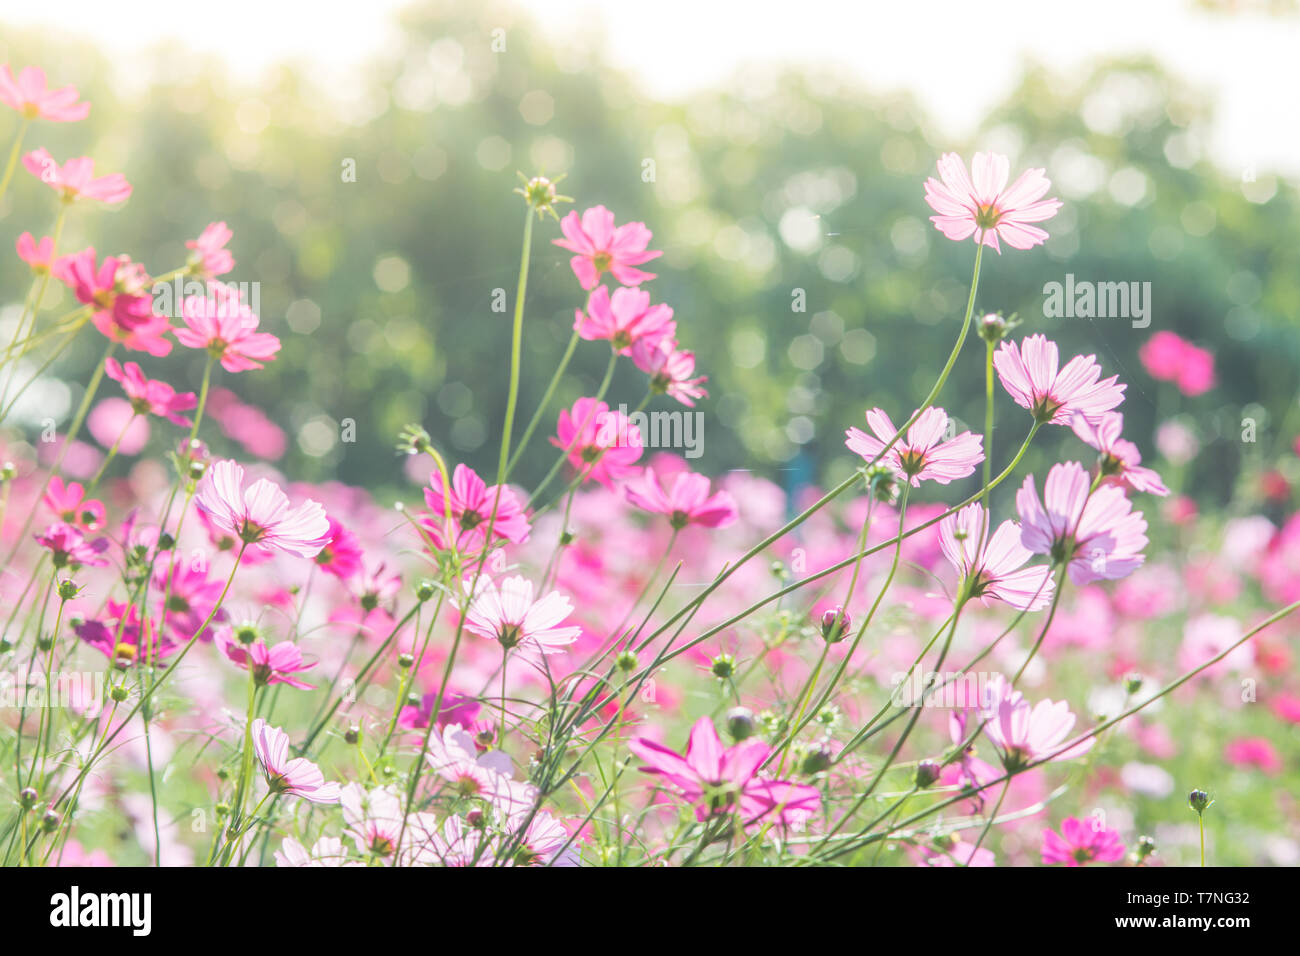 Cosmos flowers in nature, sweet background, blurry flower background, light pink and deep pink cosmos Stock Photo